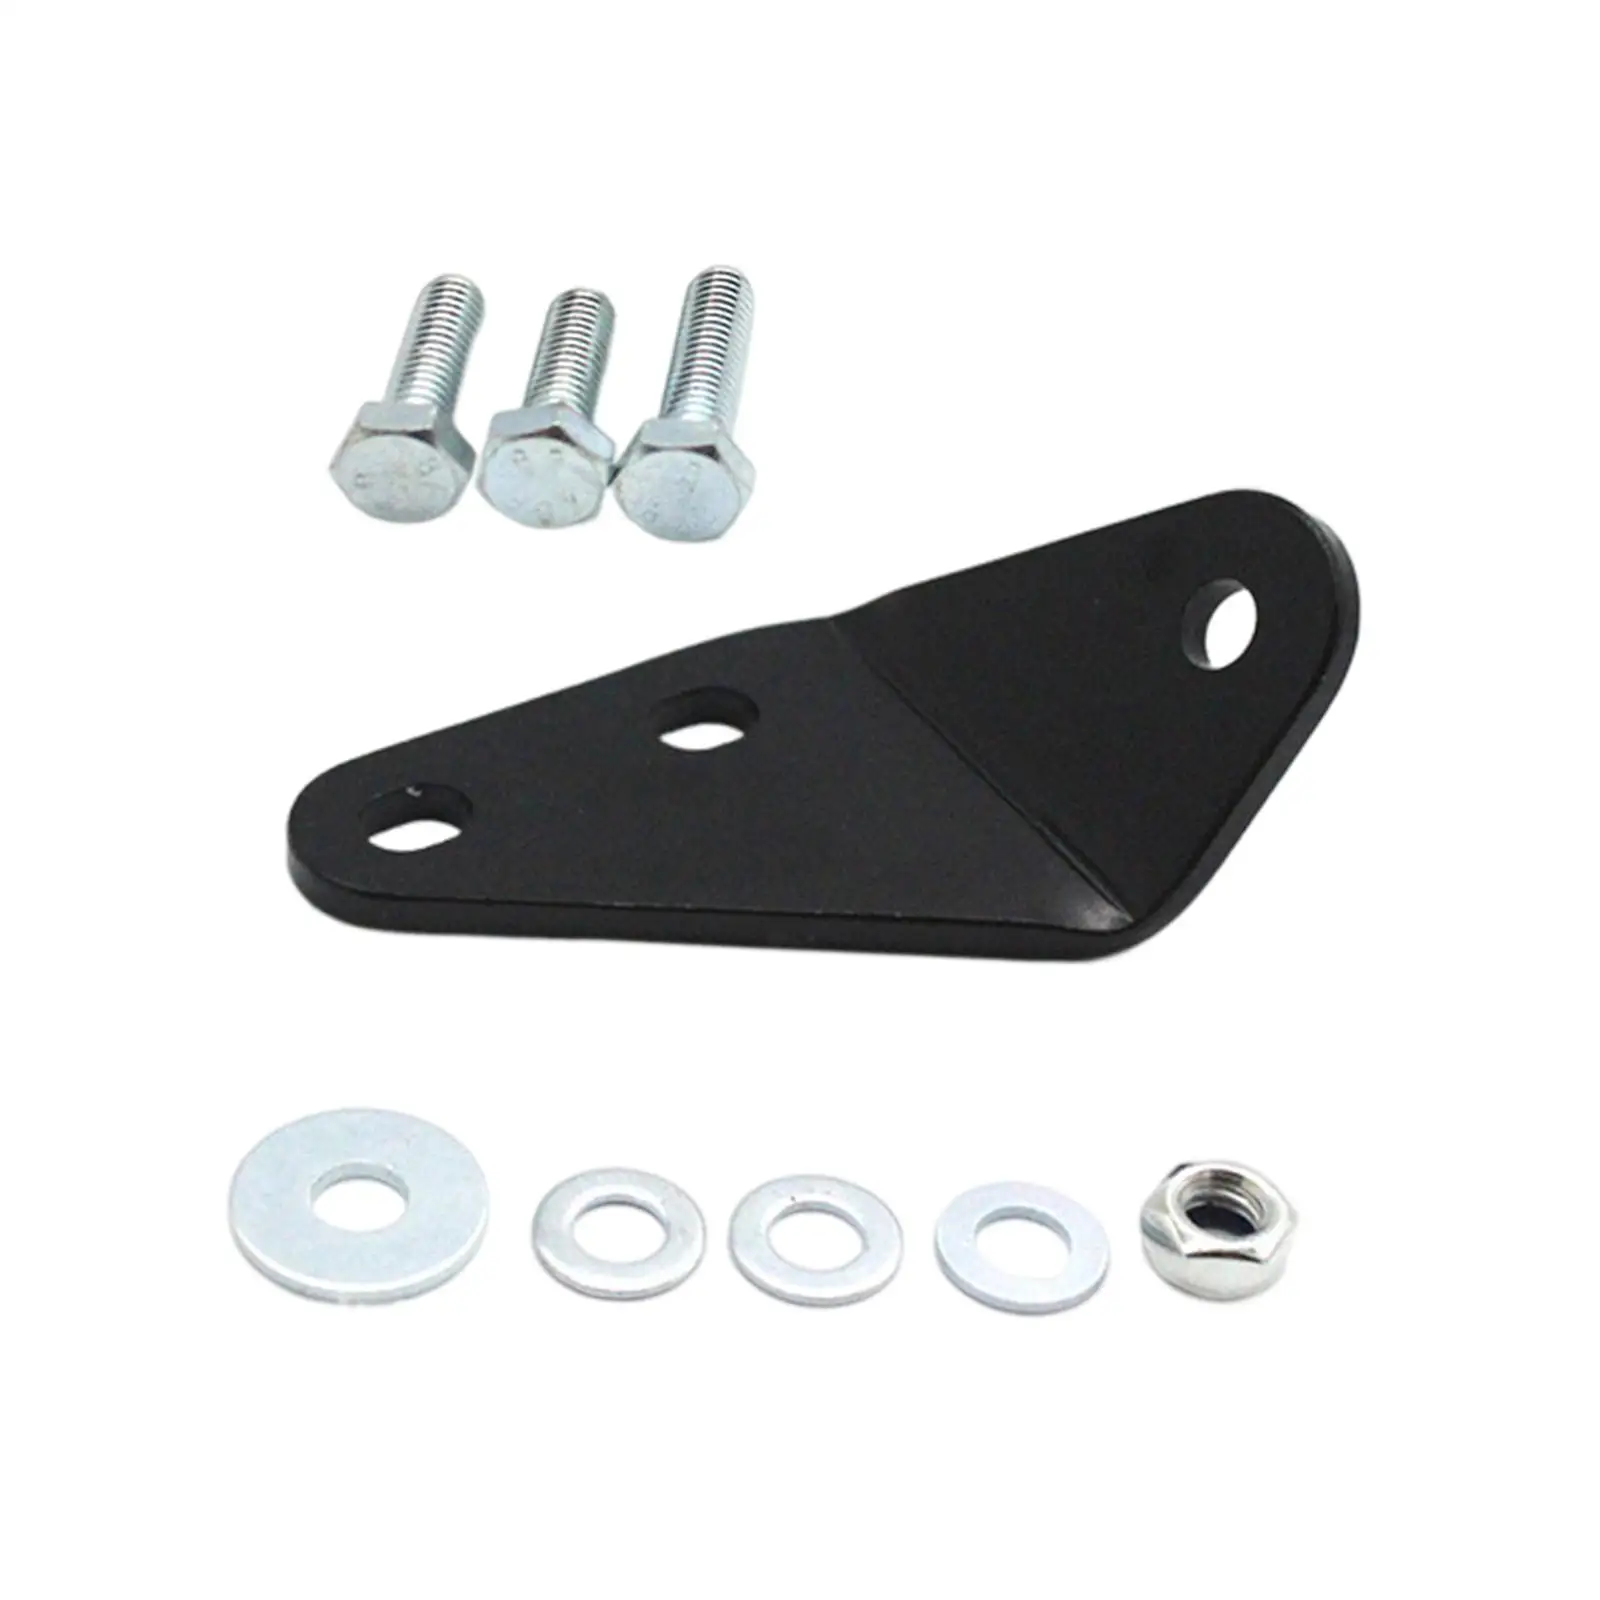 Clutch Pedal Bracket Replace Parts for VW T4 Transporter Caravelle